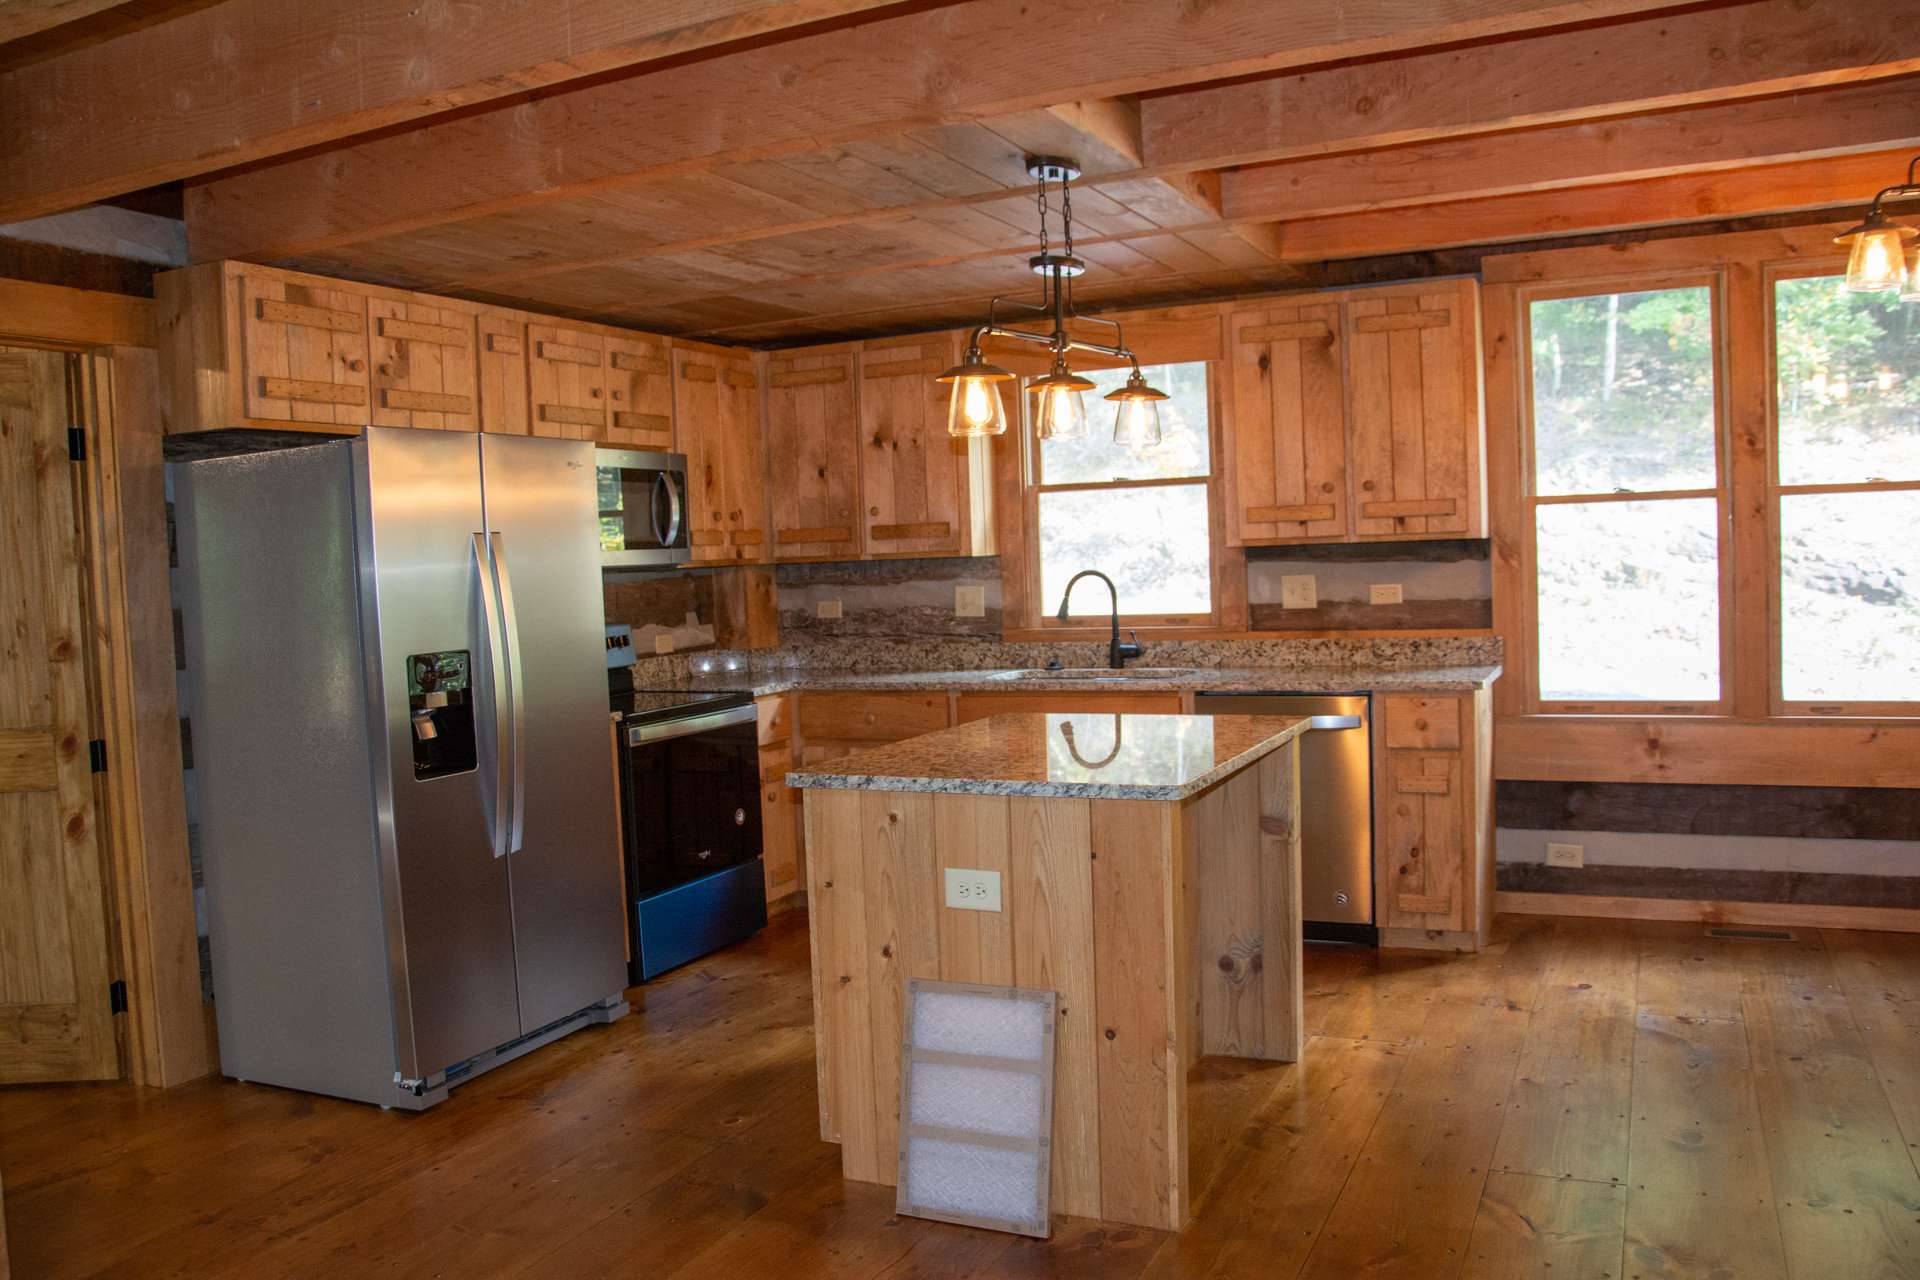 The kitchen features custom cabinetry, granite counter tops, and a center island adding to the work and storage space.